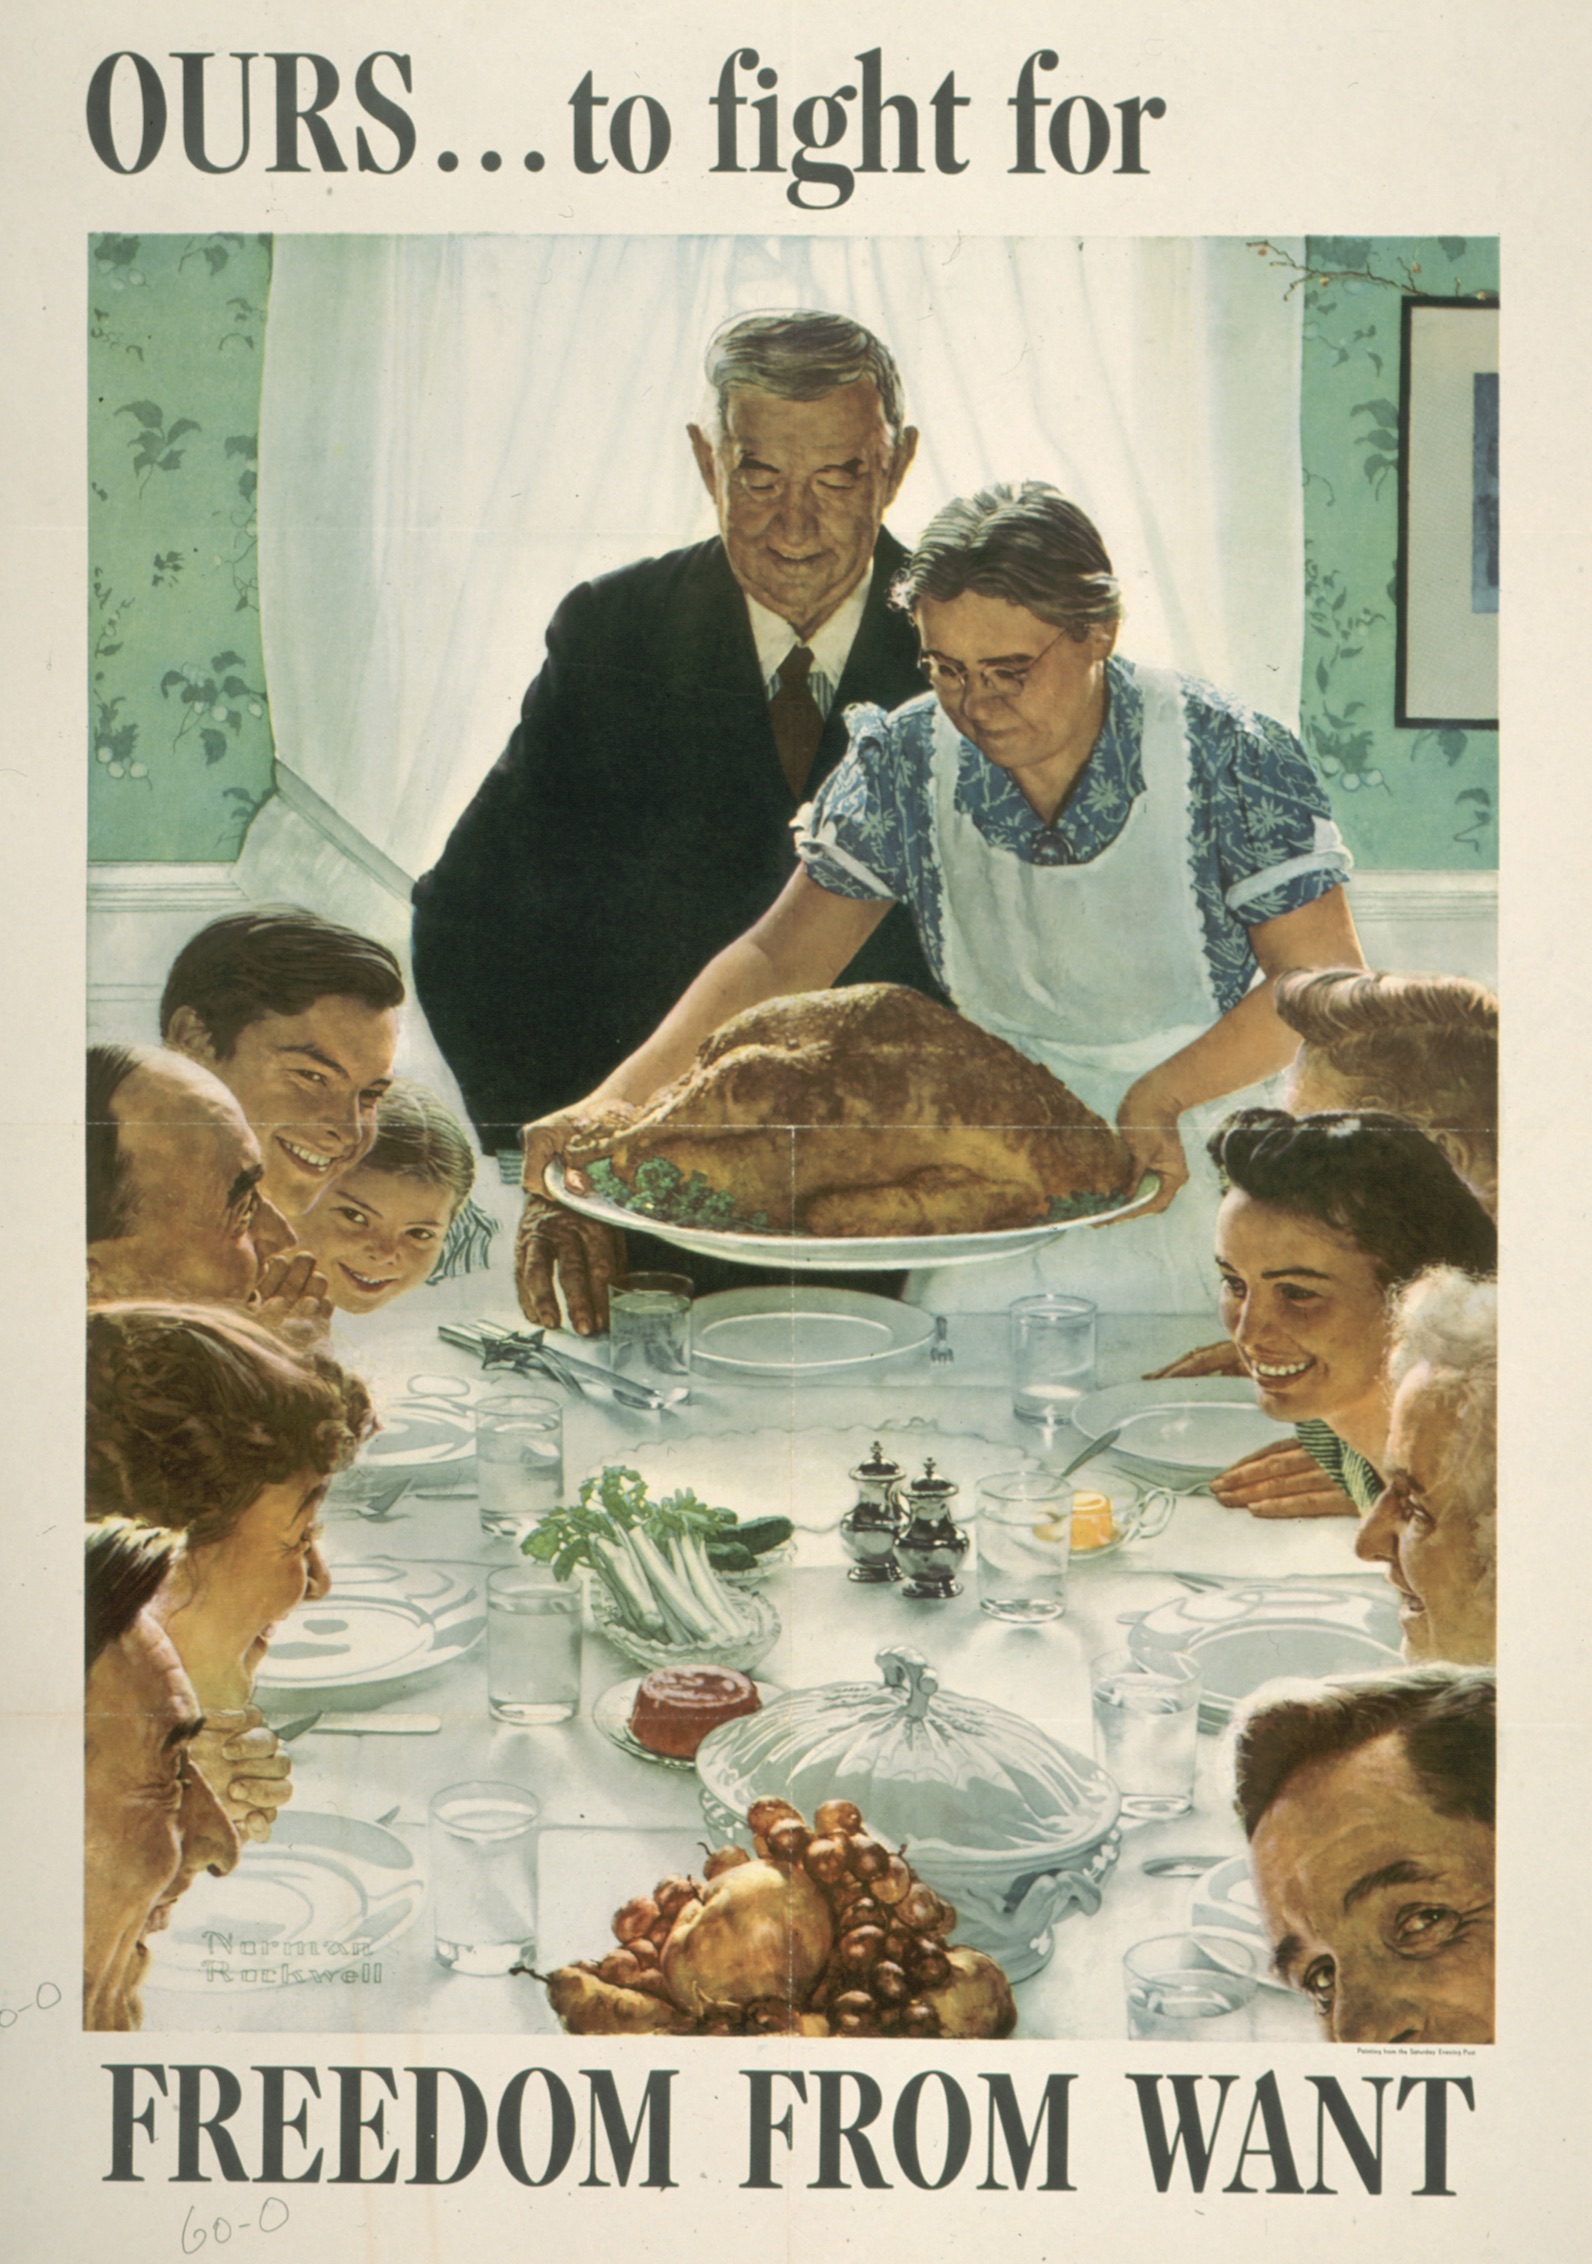 Caption: Norman Rockwell, Freedom from Want, 1943, offset color lithograph on paper, Texas War Records Collection, 85.170.156